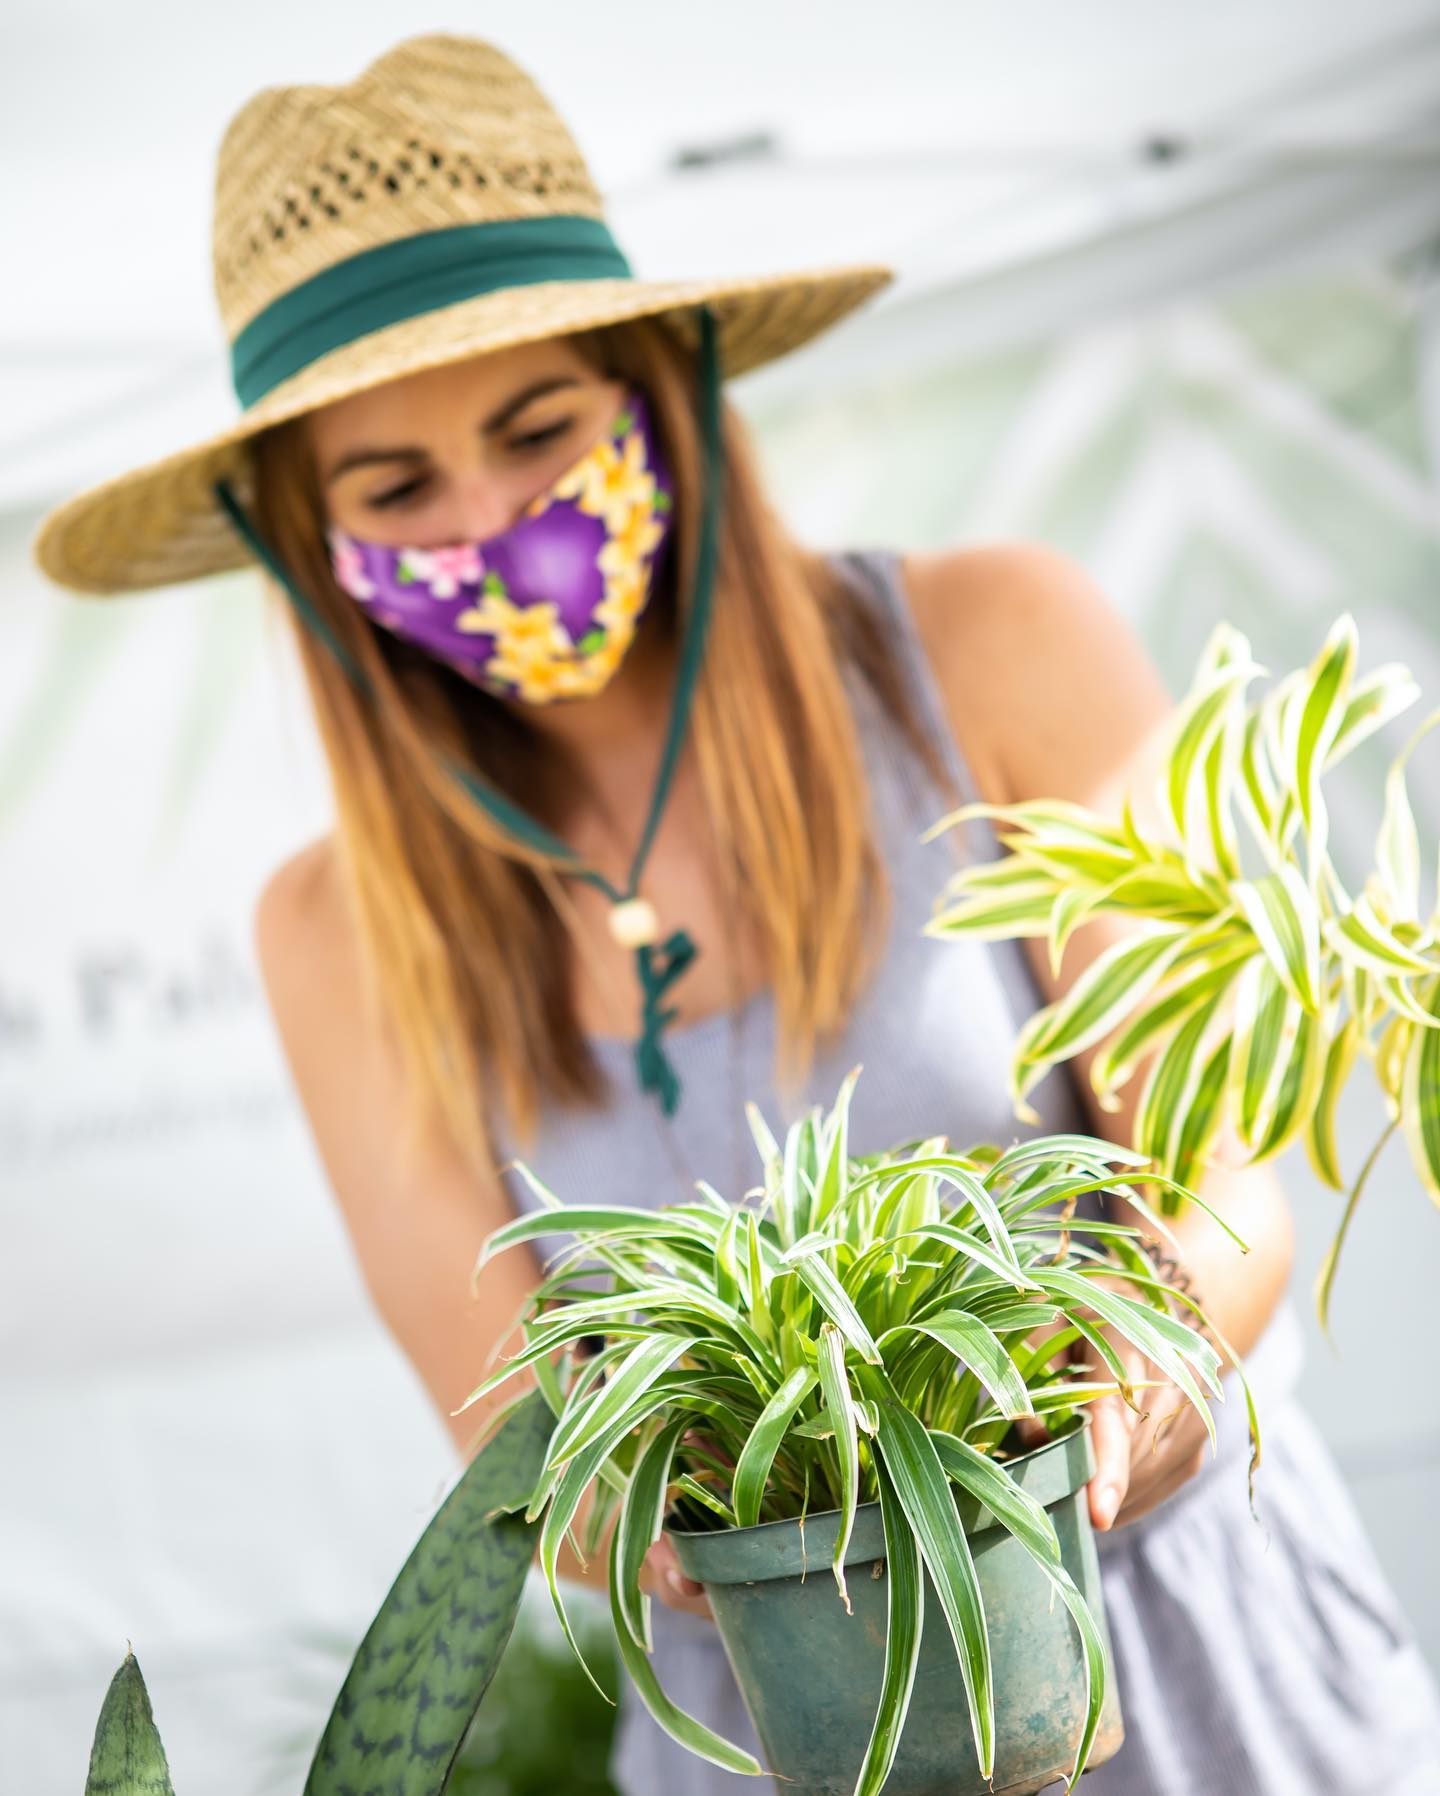 See what all the buzz is about and explore over 100 vendors at the Kaka'ako Farmers Market in Ward Village. This expanding marketplace has become a melting pot of local eateries, artisans and farmers alike.